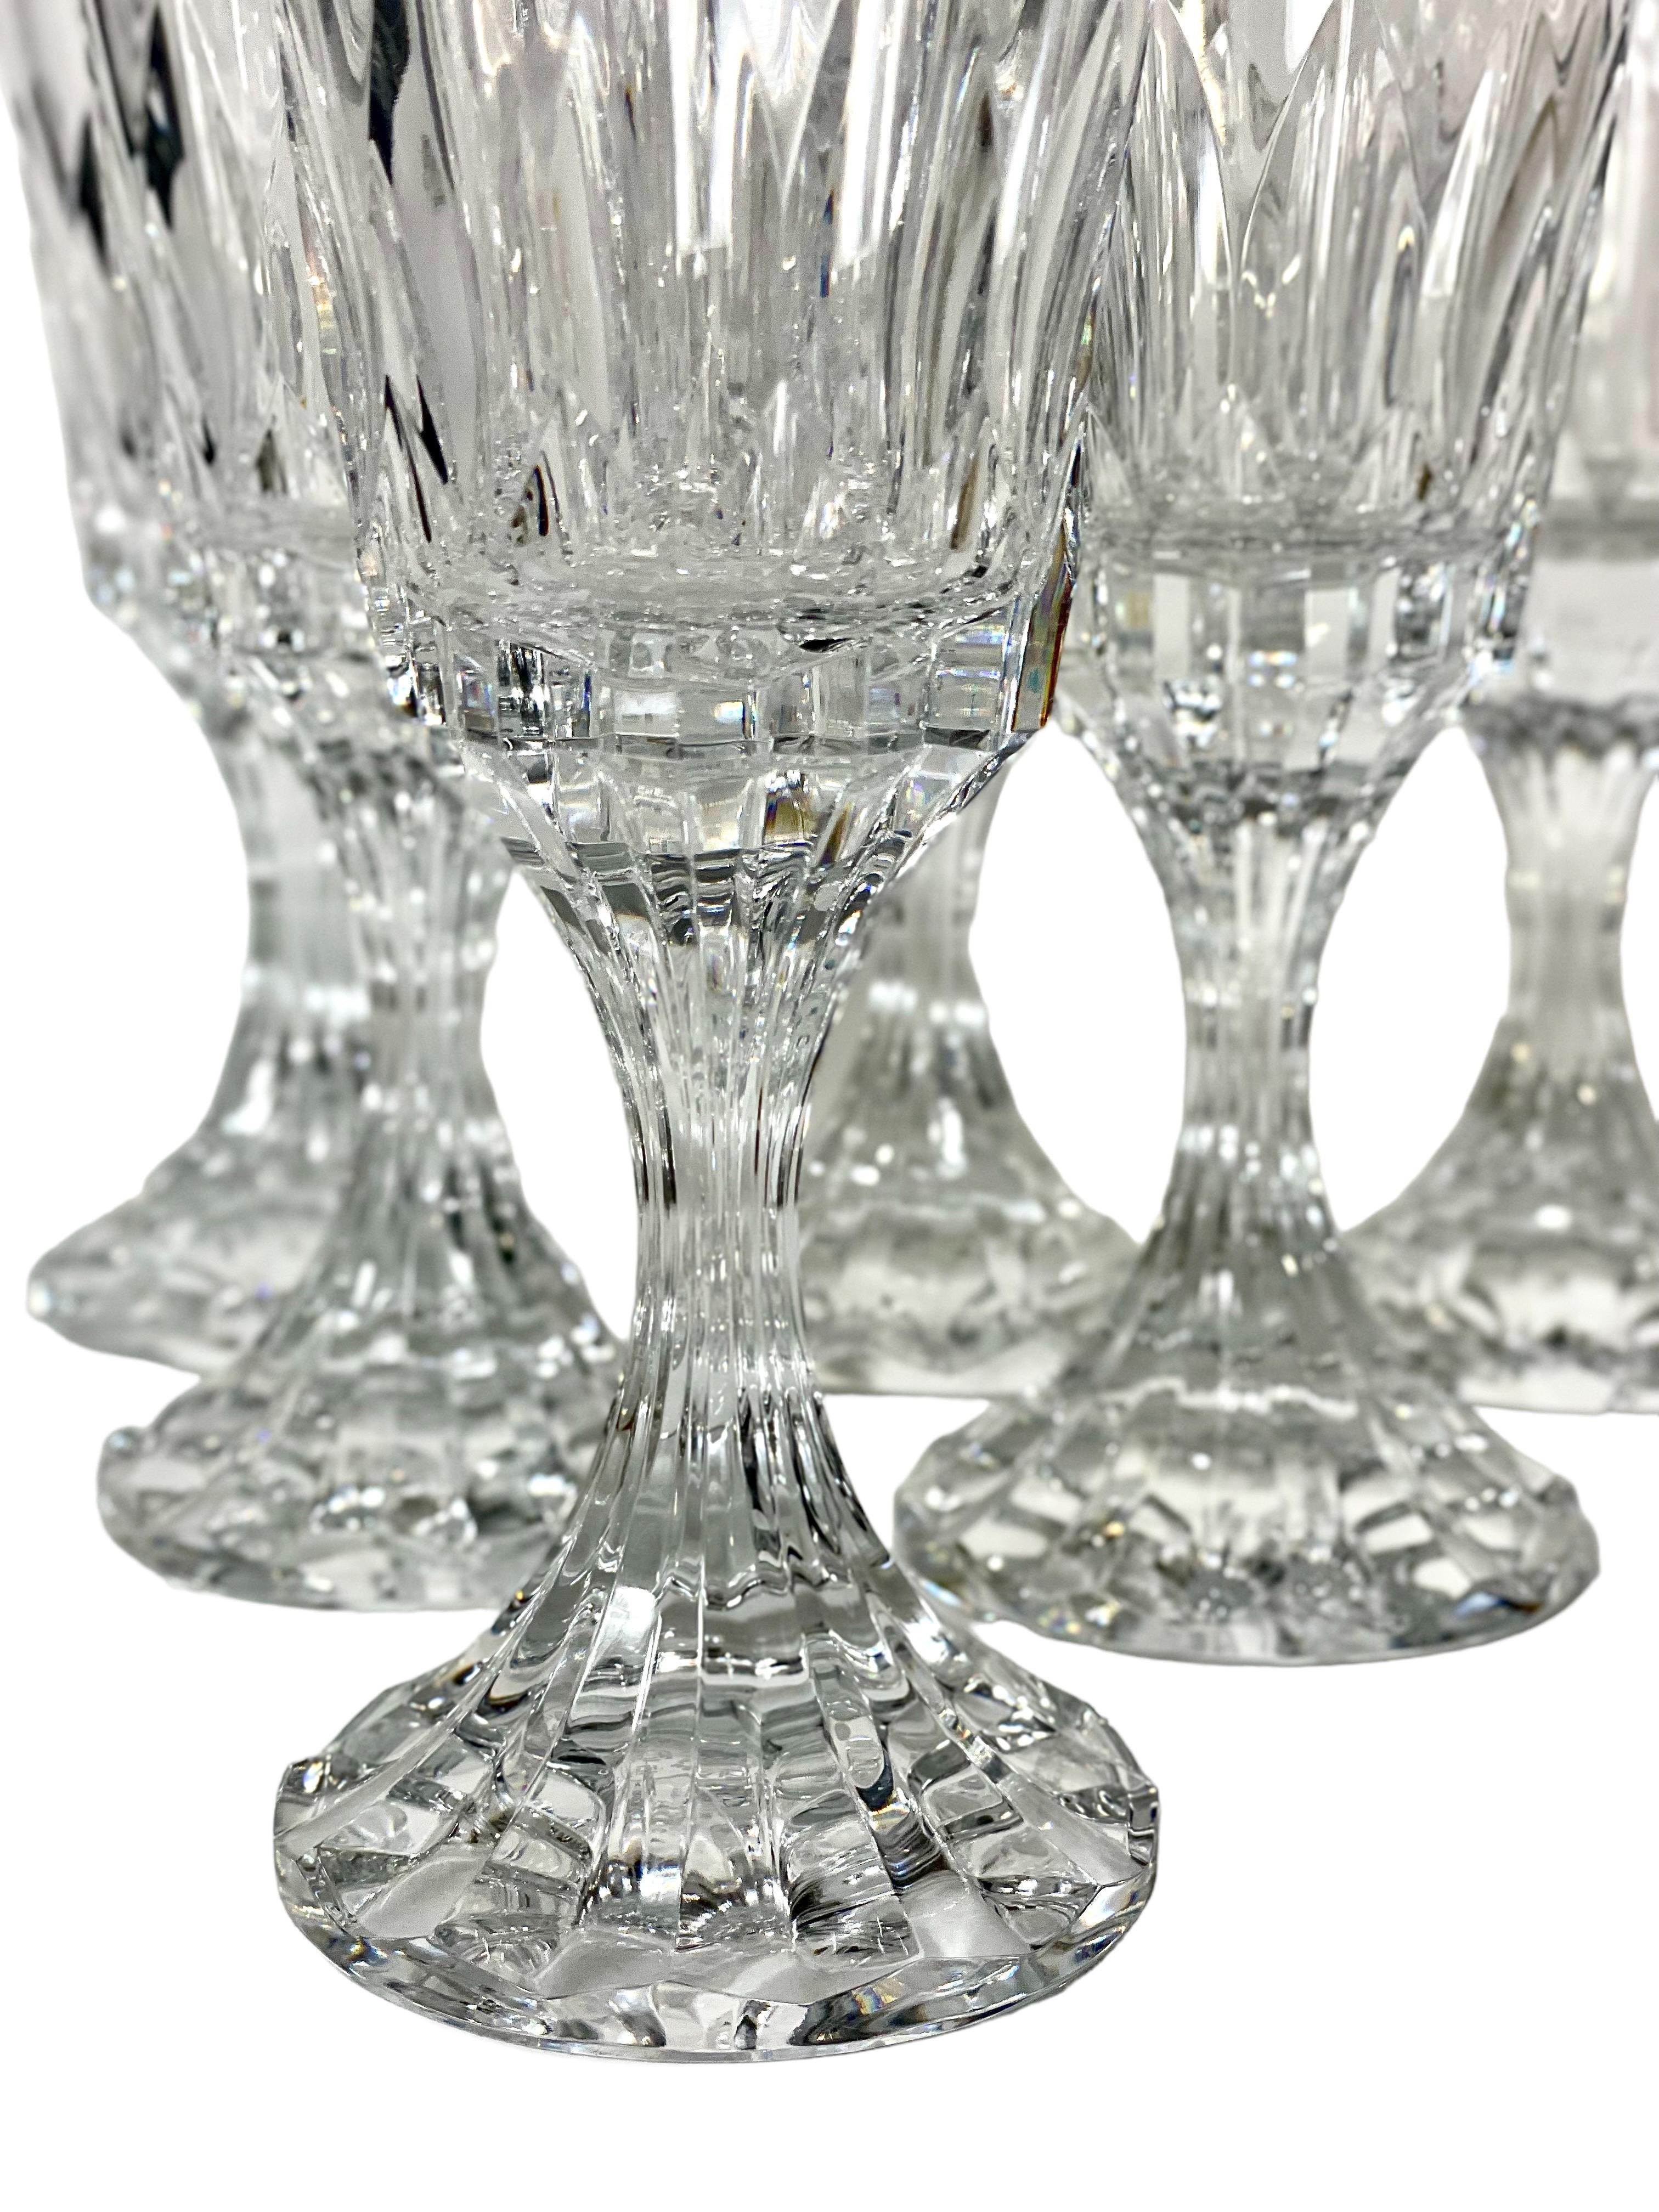 A sumptuous set of six Baccarat crystal wine glasses, in the sought-after Assas design. Acid- etch signed on their base, these substantial glasses boast a magnificently sculpted foot, and a stem that catches the light in a most dramatic way. Assas